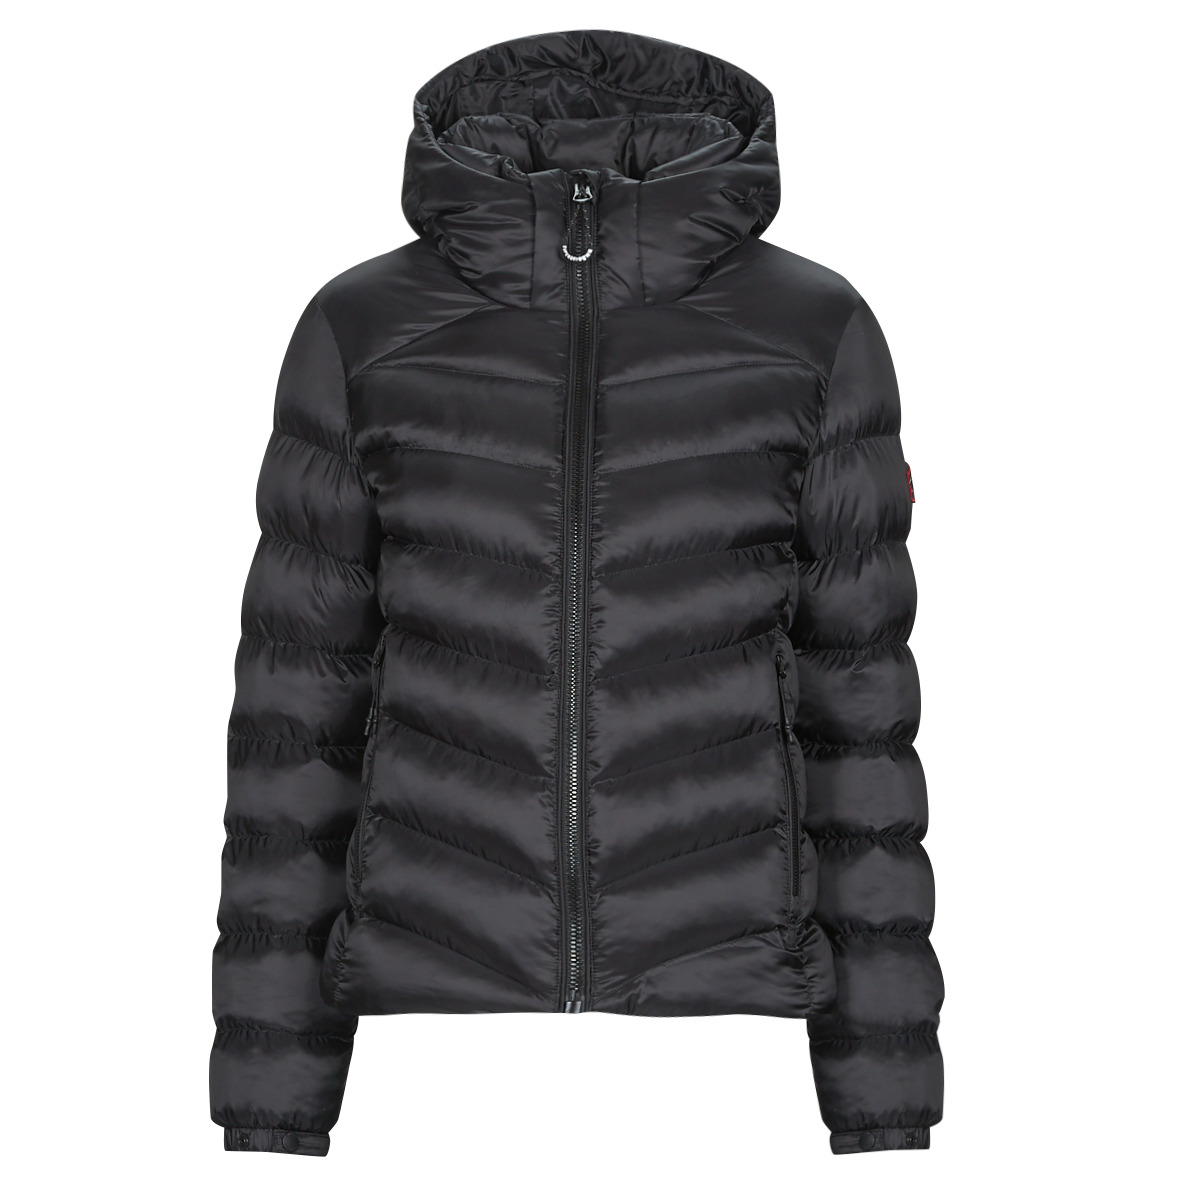 Superdry HOODED FUJI PADDED Women Free Spartoo Clothing - coats - Black | ! JACKET NET Duffel delivery